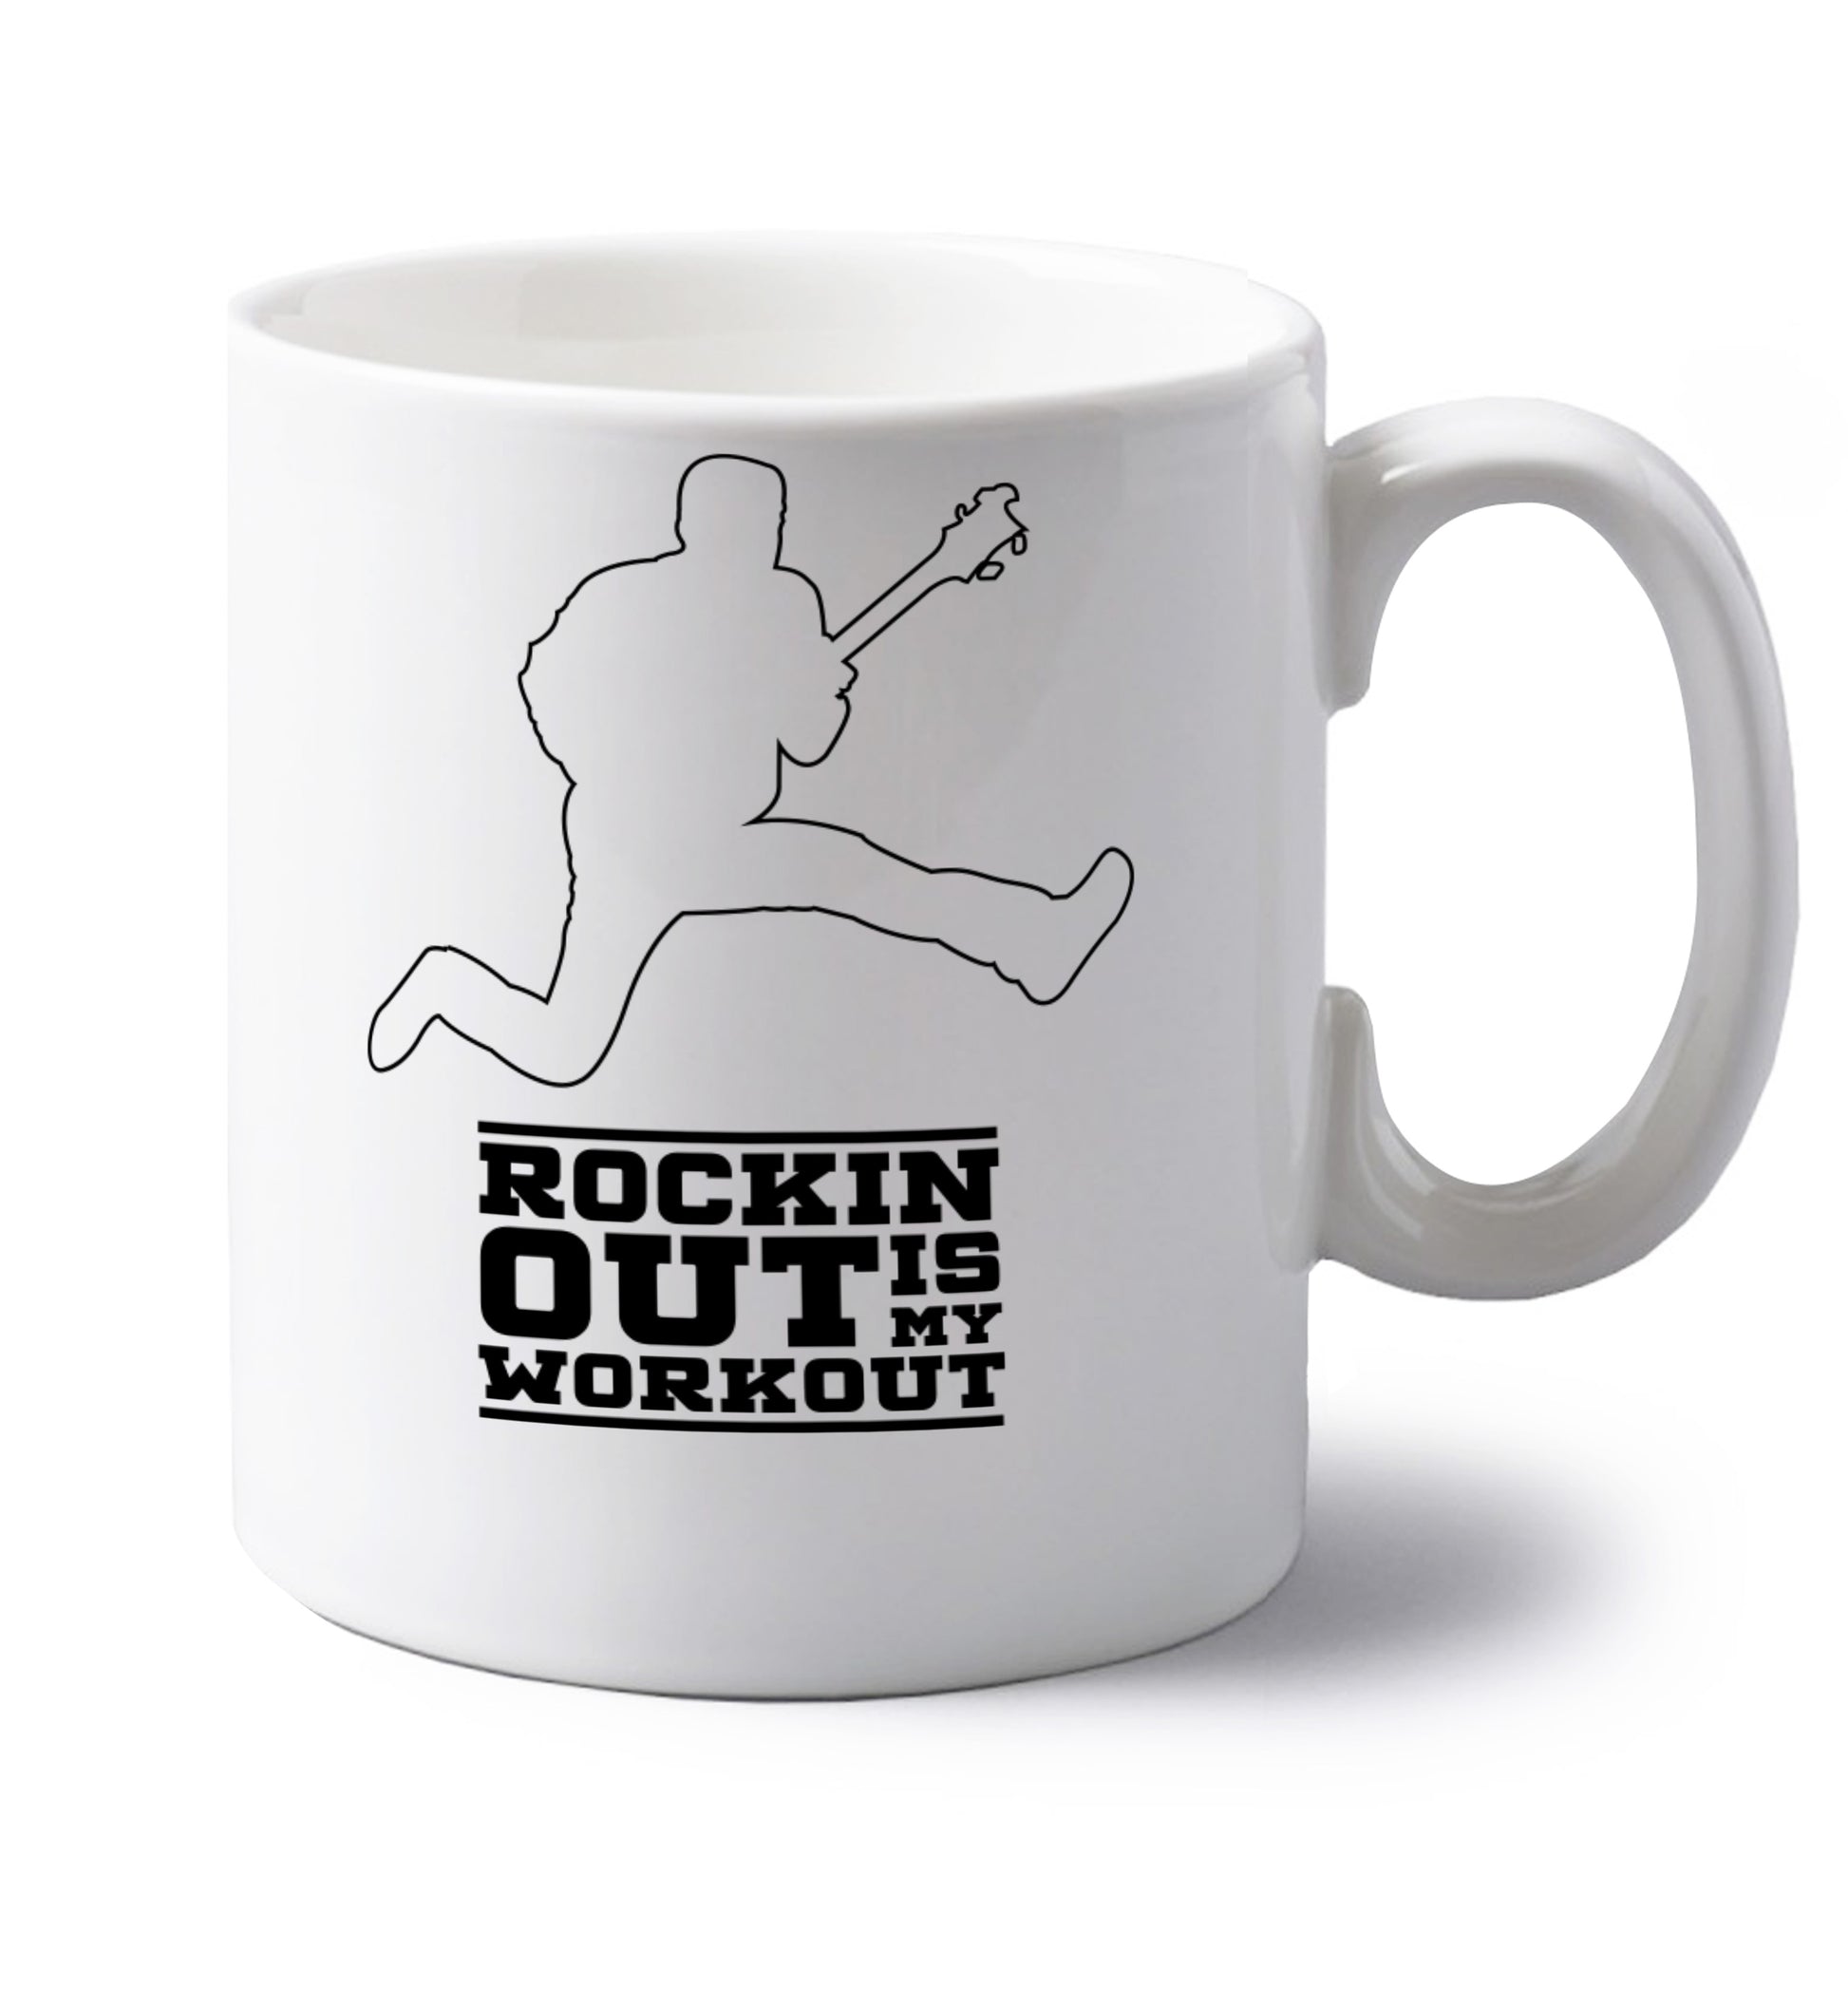 Rockin out is my workout 2 left handed white ceramic mug 